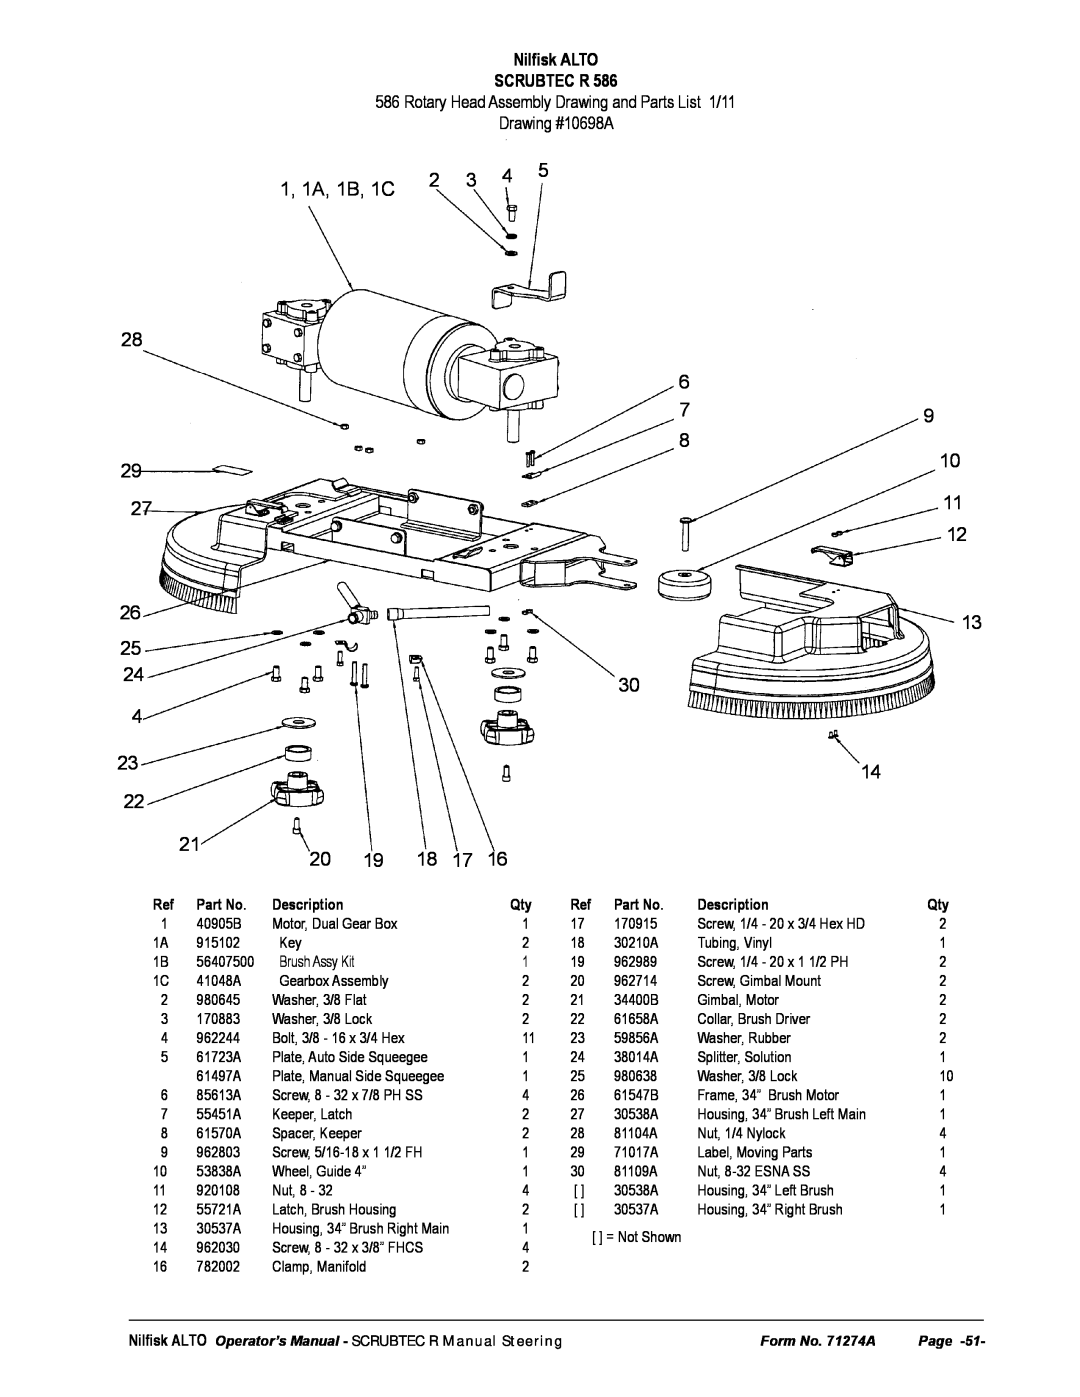 Nilfisk-ALTO 571, 586 manual 20 19 18 17, 1, 1A, 1B, 1C, Rotary Head Assembly Drawing and Parts List 1/11 Drawing #10698A 